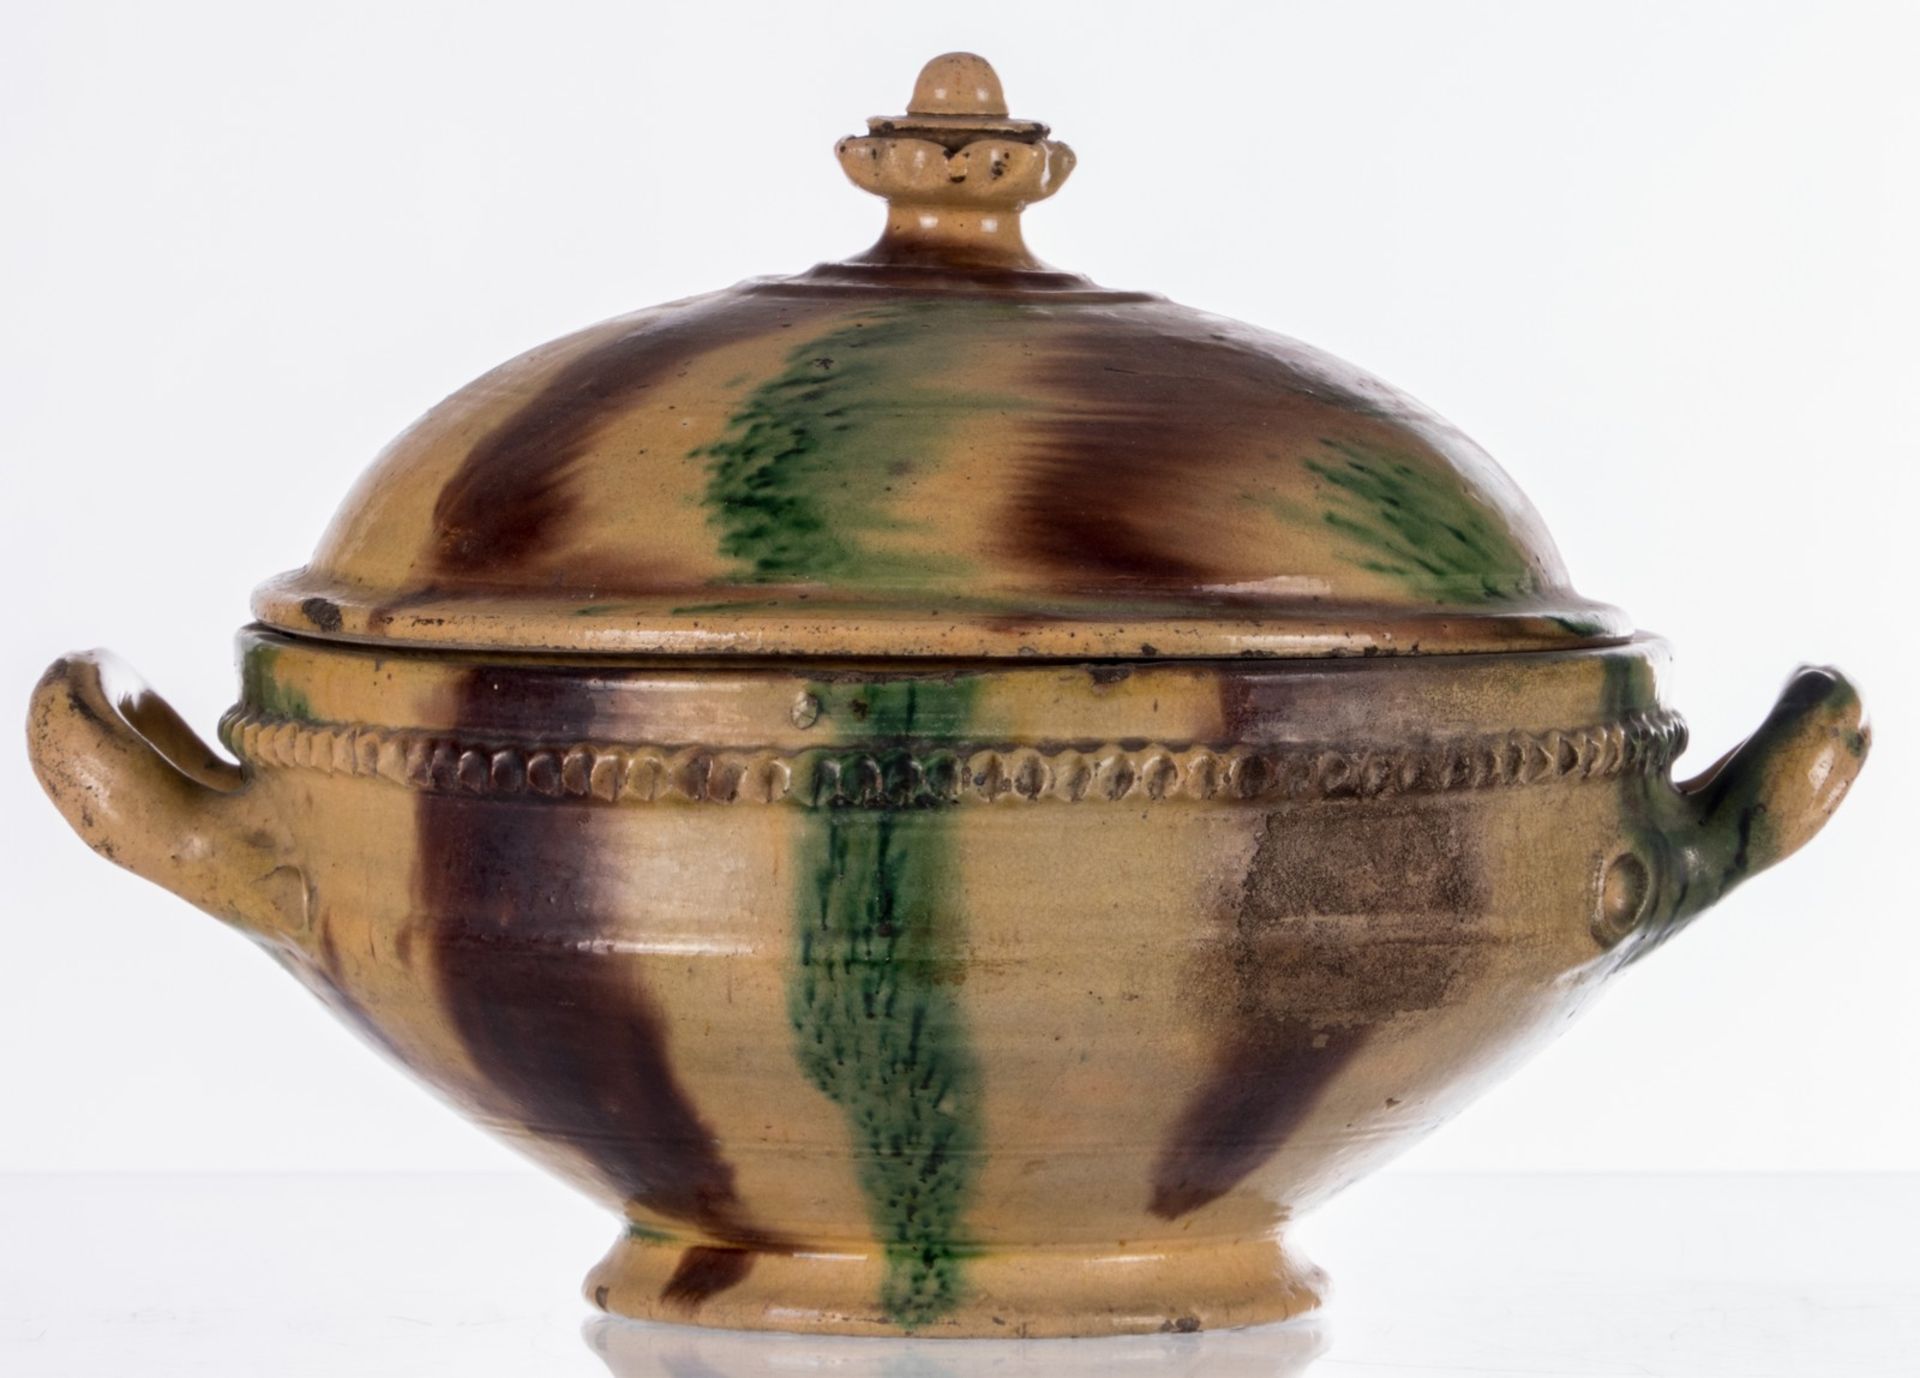 A 19thC polychrome decorated earthenware tureen, H 25 - W 34 cm - Image 4 of 11